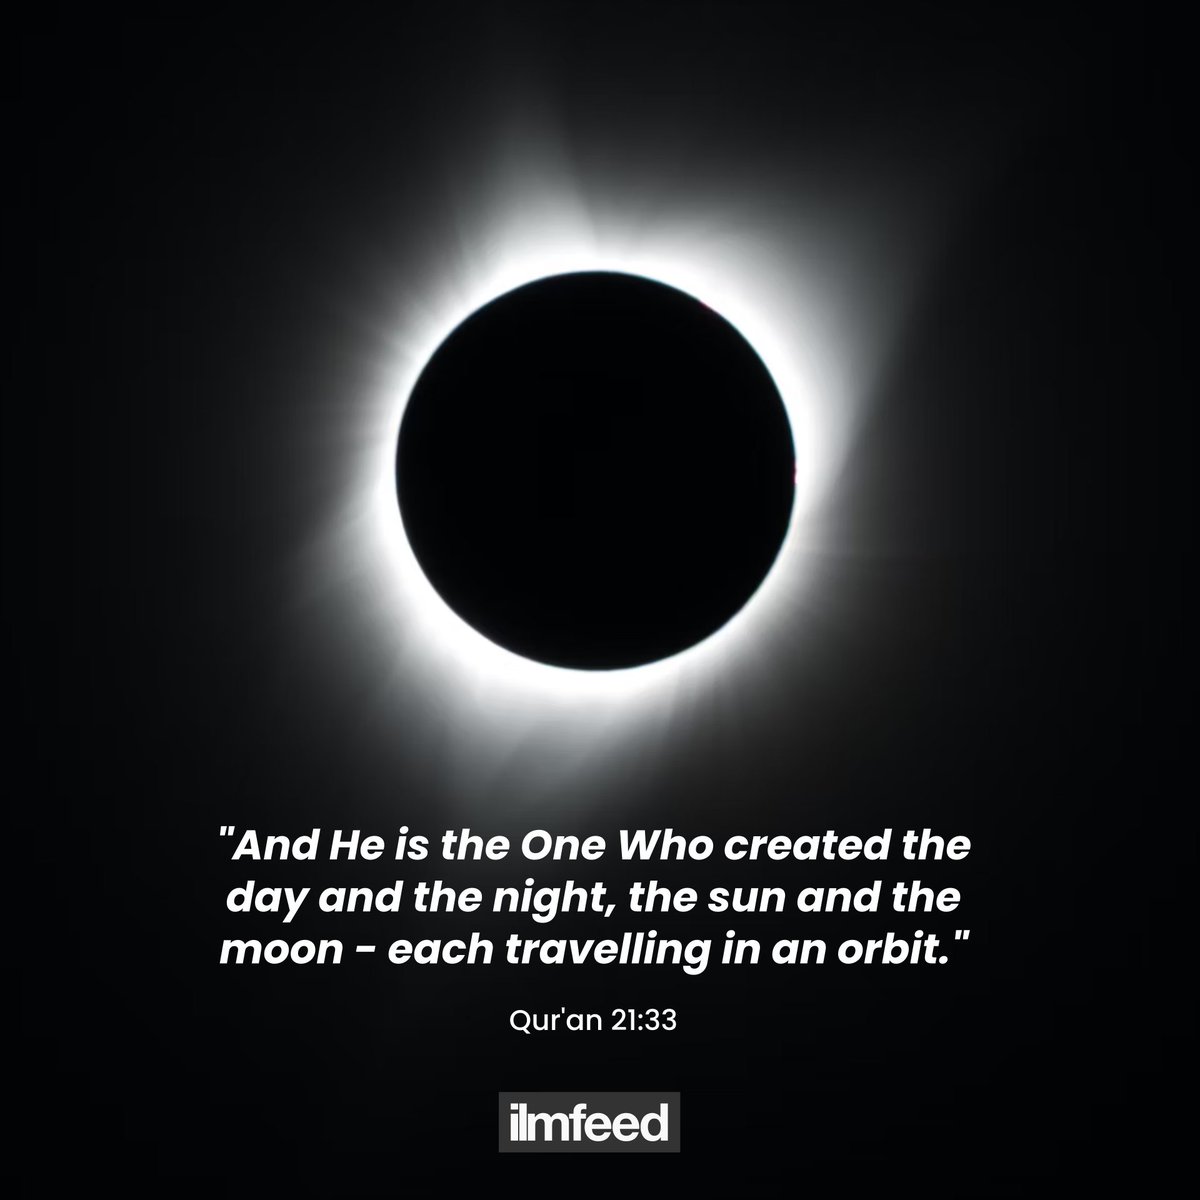 'And He is the One Who created the day and the night, the sun and the moon - each travelling in an orbit.' Qur'an 21:33 #Eclipse #Eclipse2024